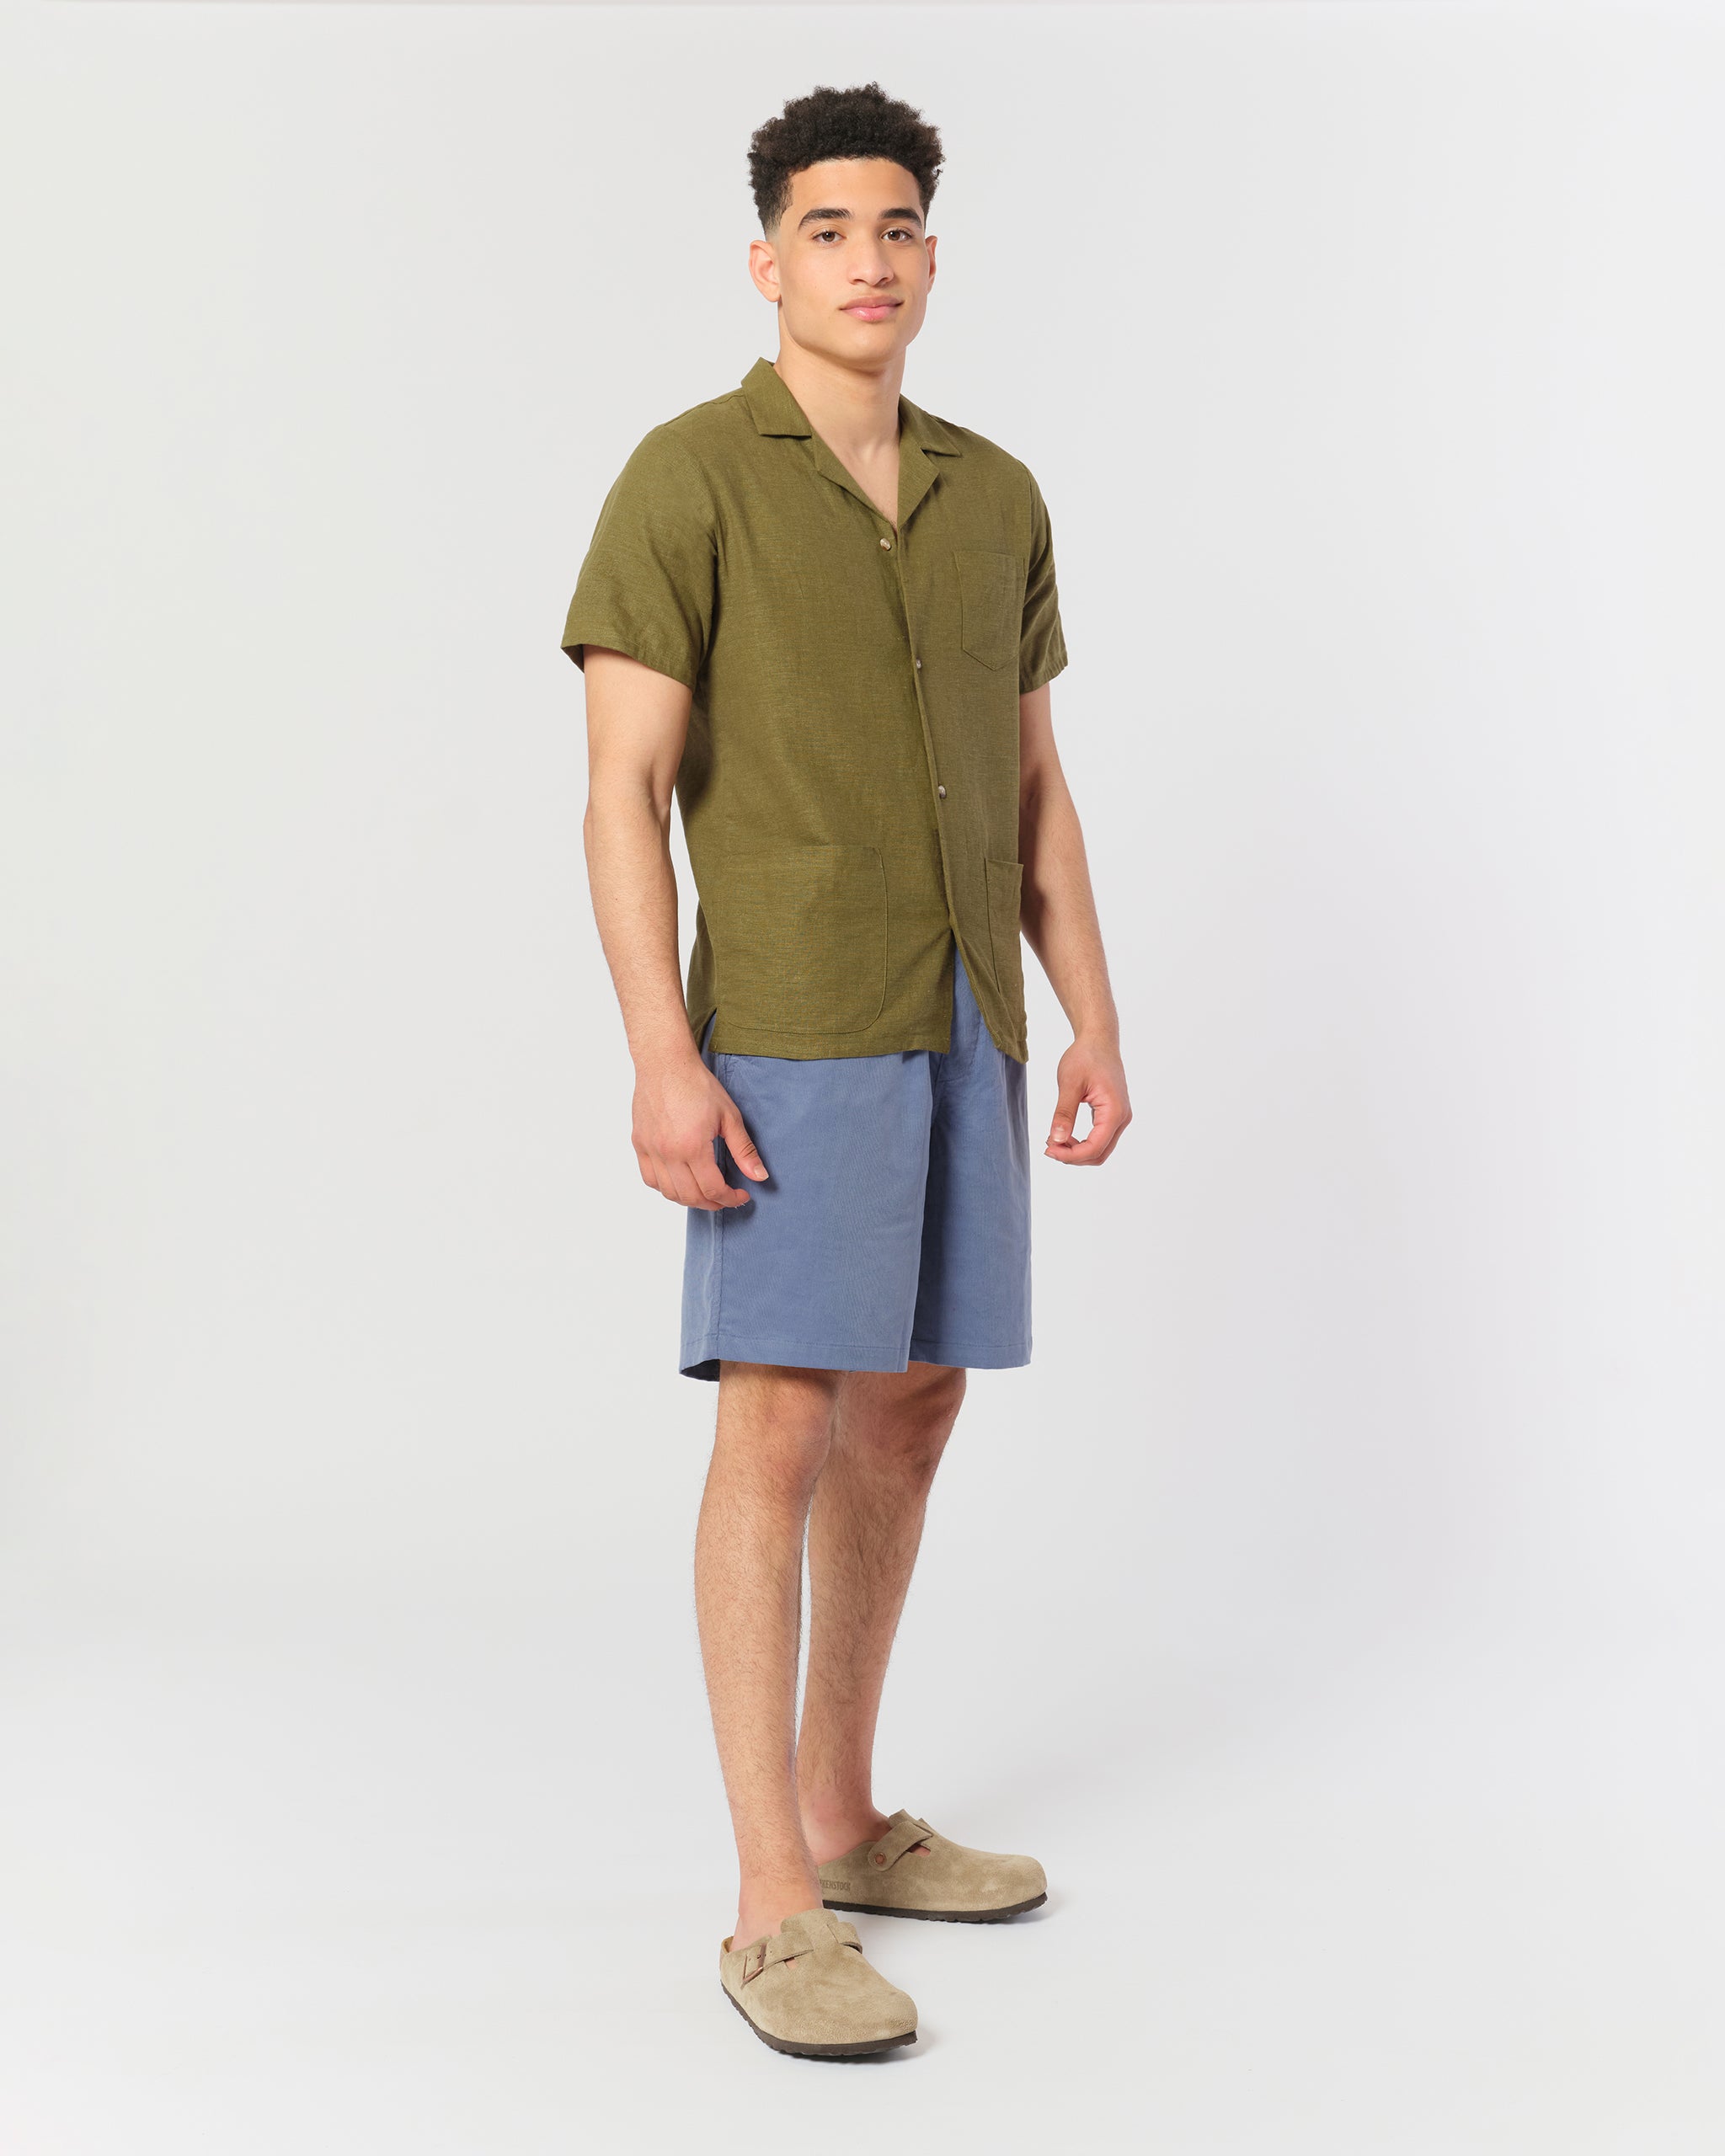 model wearing An olive green linen camp shirt with a chest pocket and two lower pockets on the front